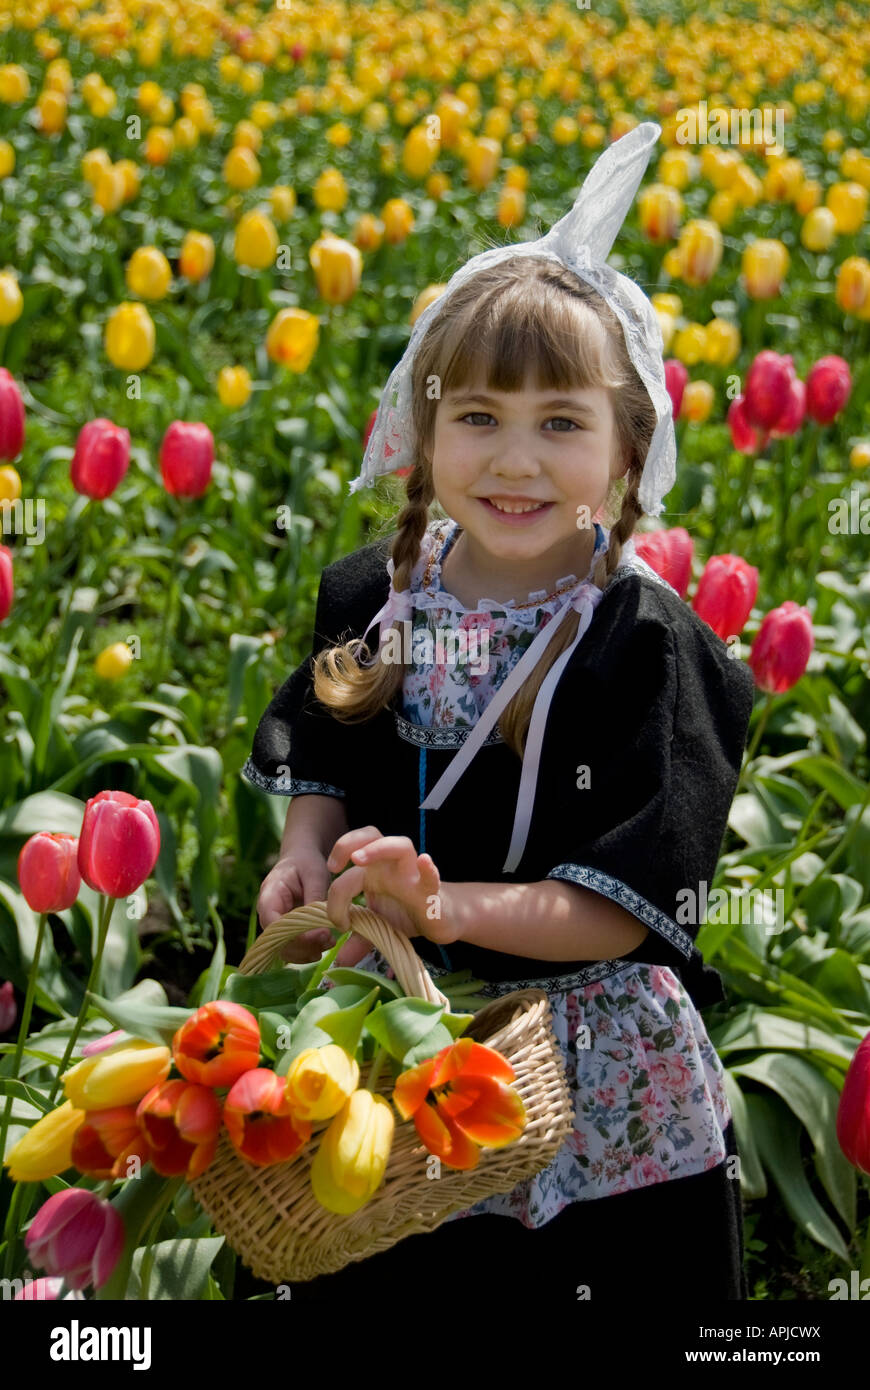 Young Girl holding a Tulip Basket in a Tulip Field Stock Photo - Alamy